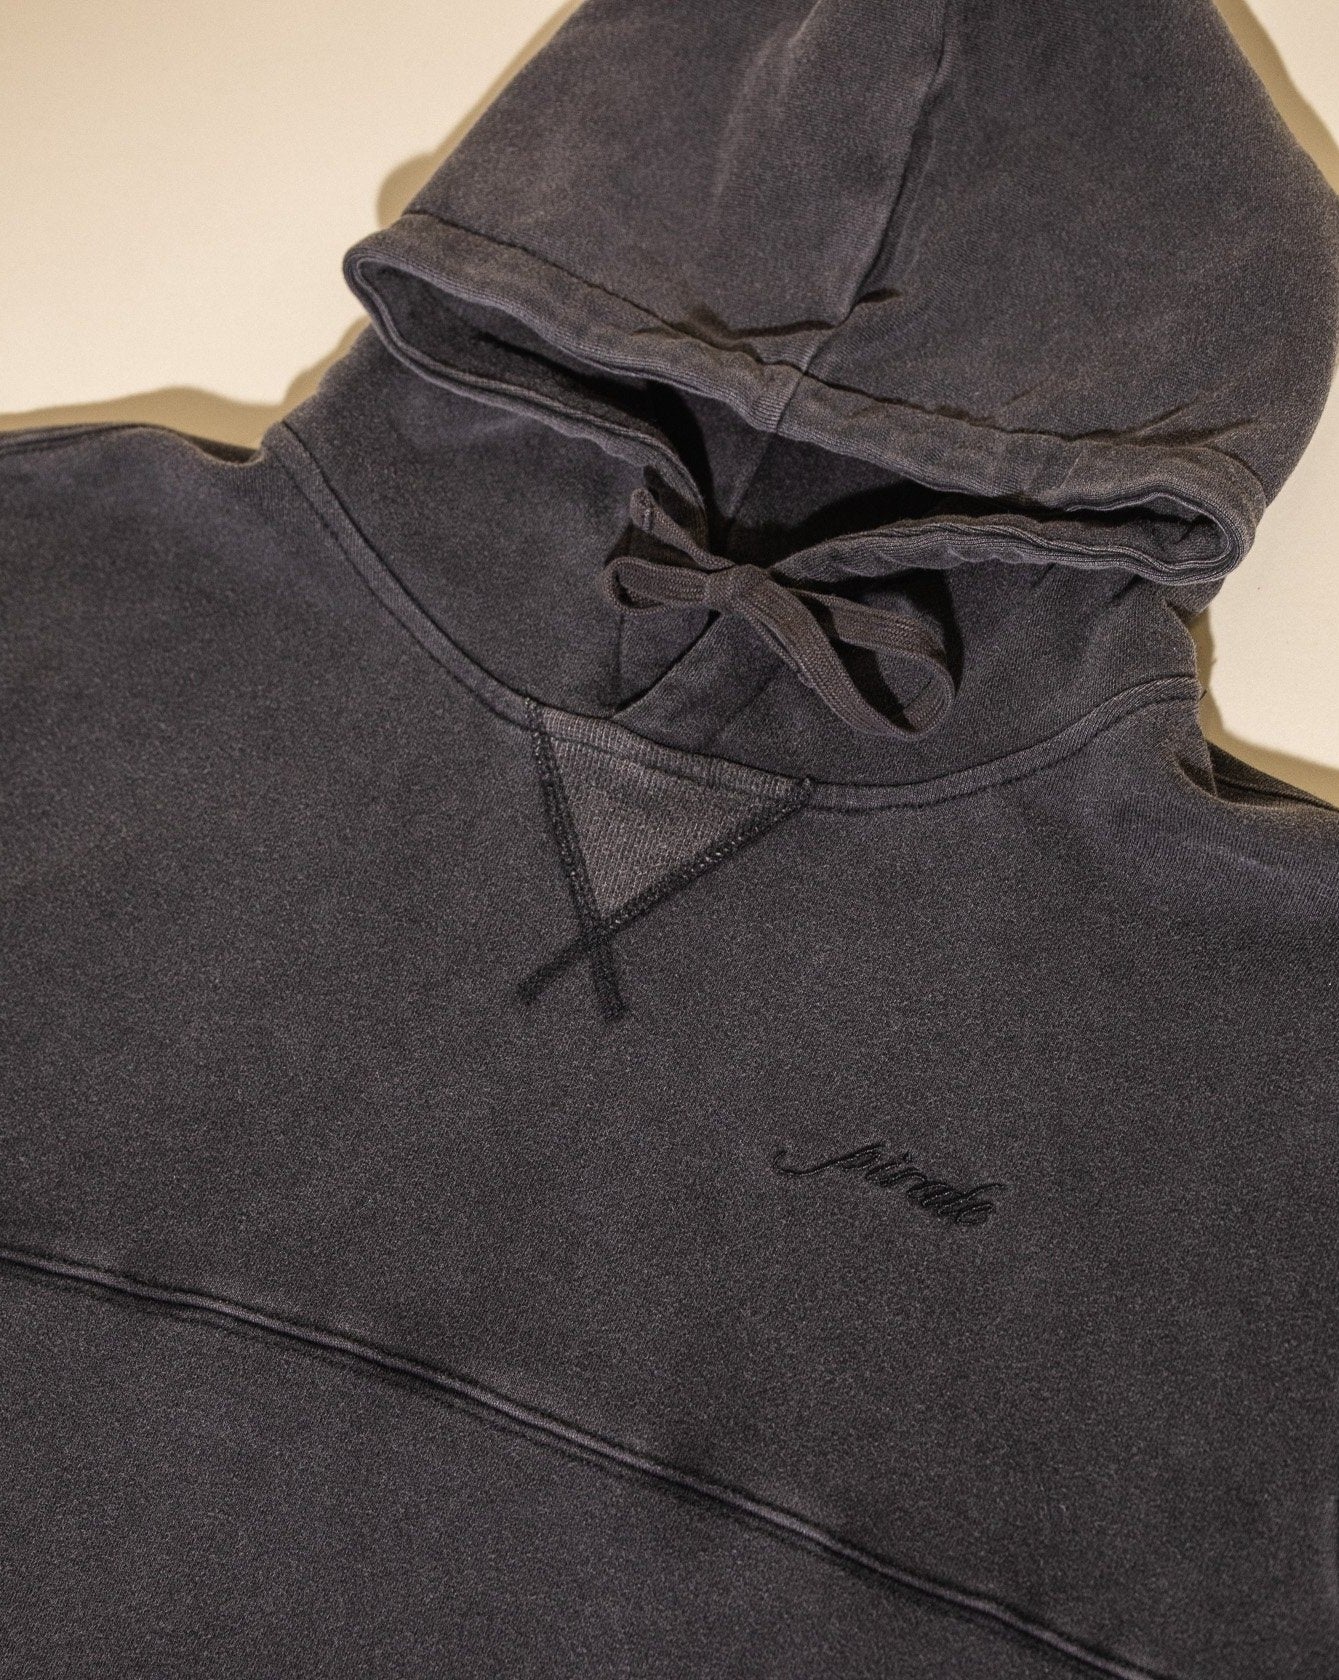 Pirate Hilltop French Terry Hoodie (Muddy Black)